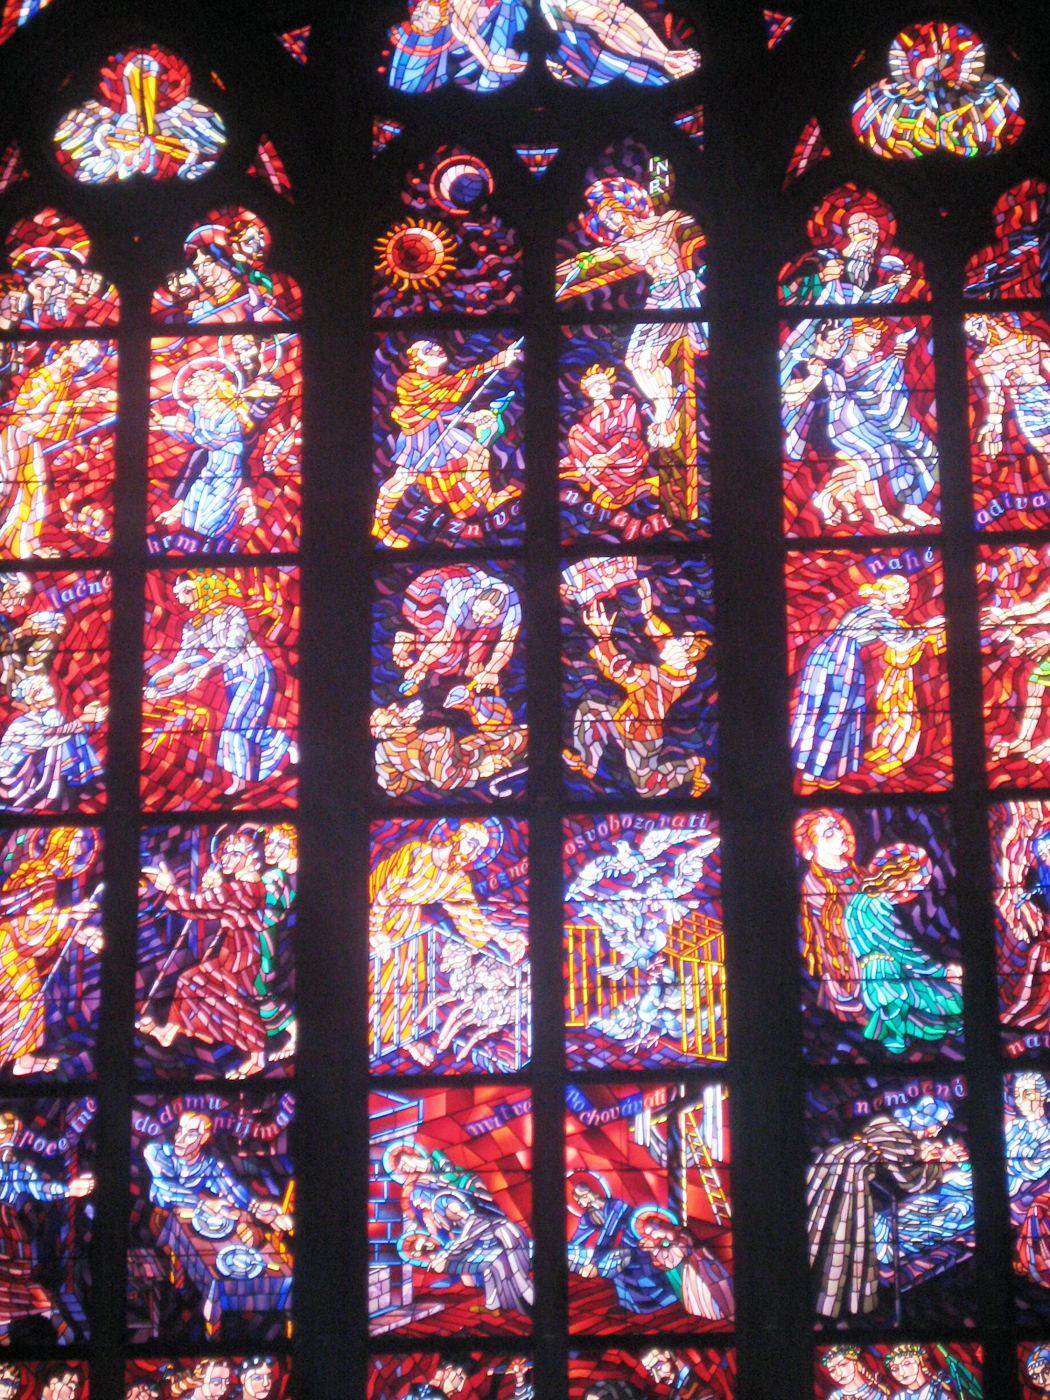 Stained church glass photo